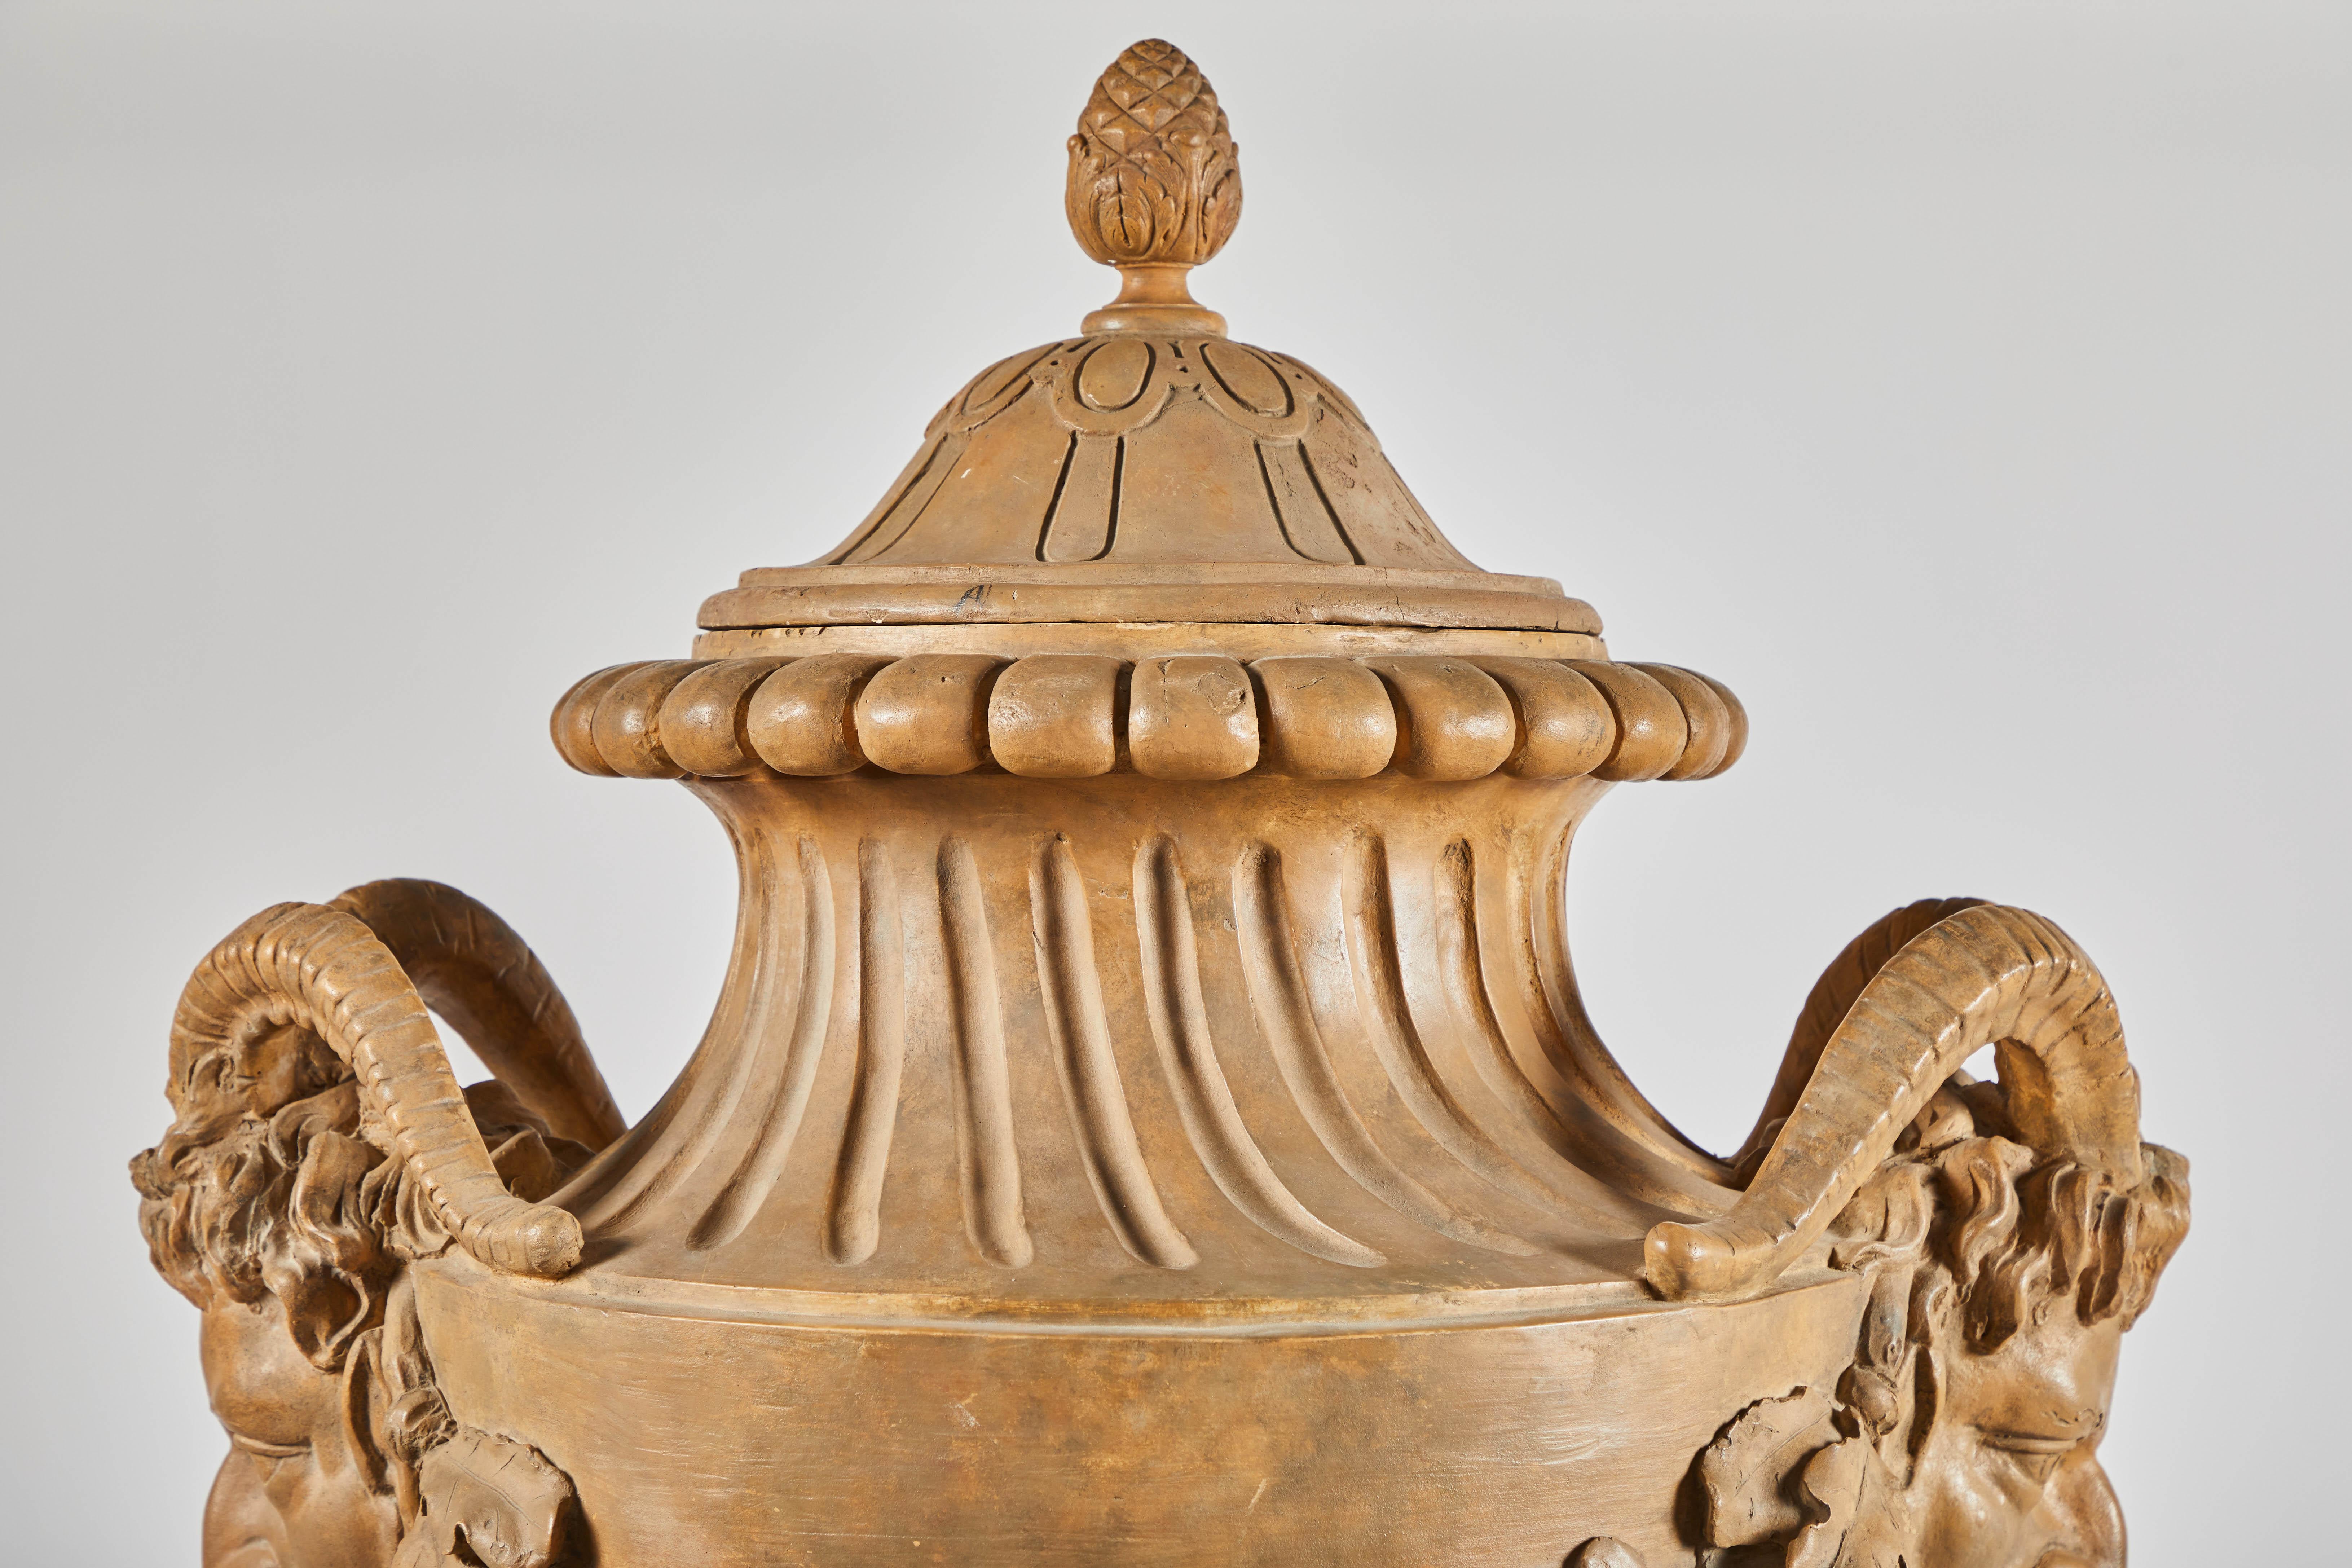 18th Century Terracotta Urns on Pedestals from the Collection of Karl Lagerfeld For Sale 1